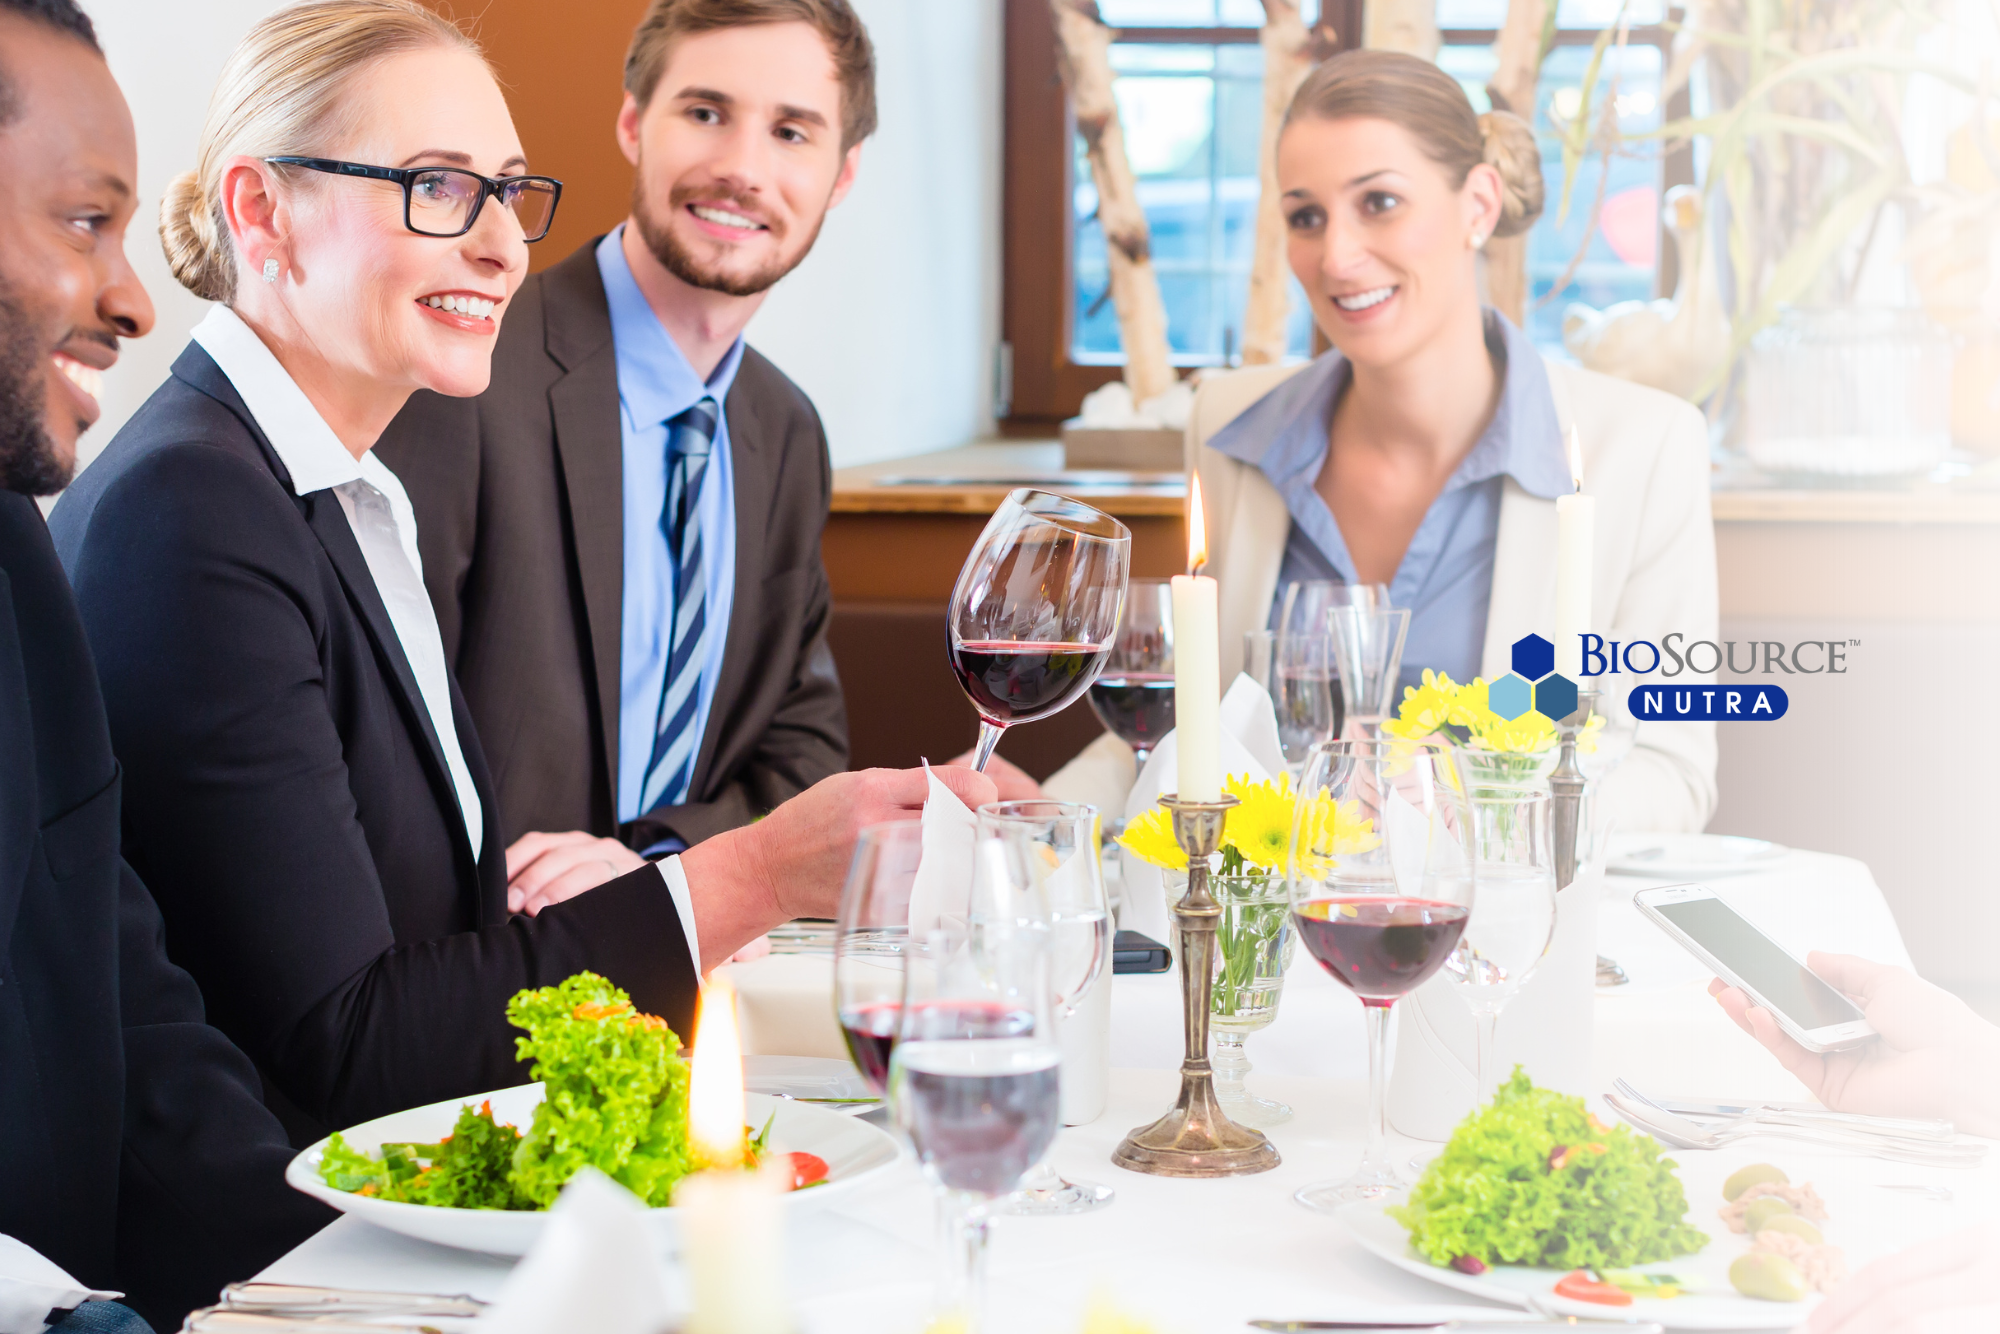 A group of young professionals dine together at a restaurant